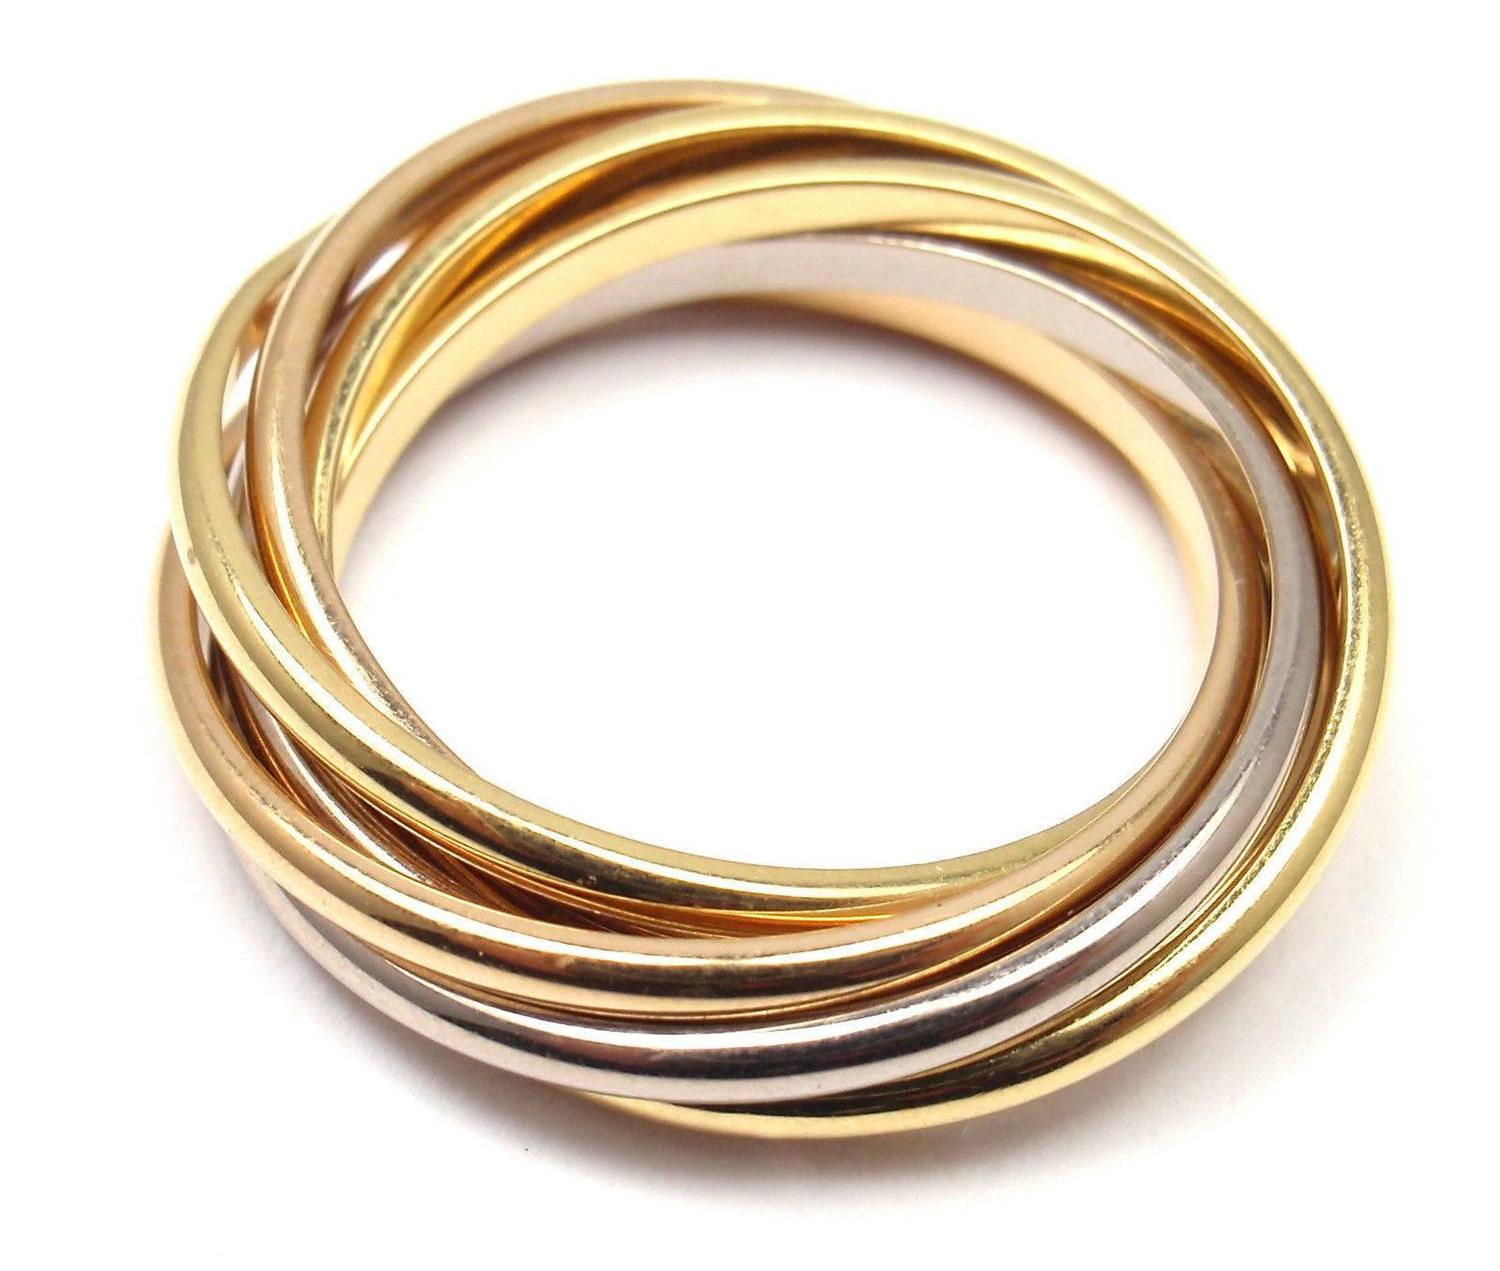 Cartier Trinity 7 Band Tricolor Gold Ring at 1stdibs